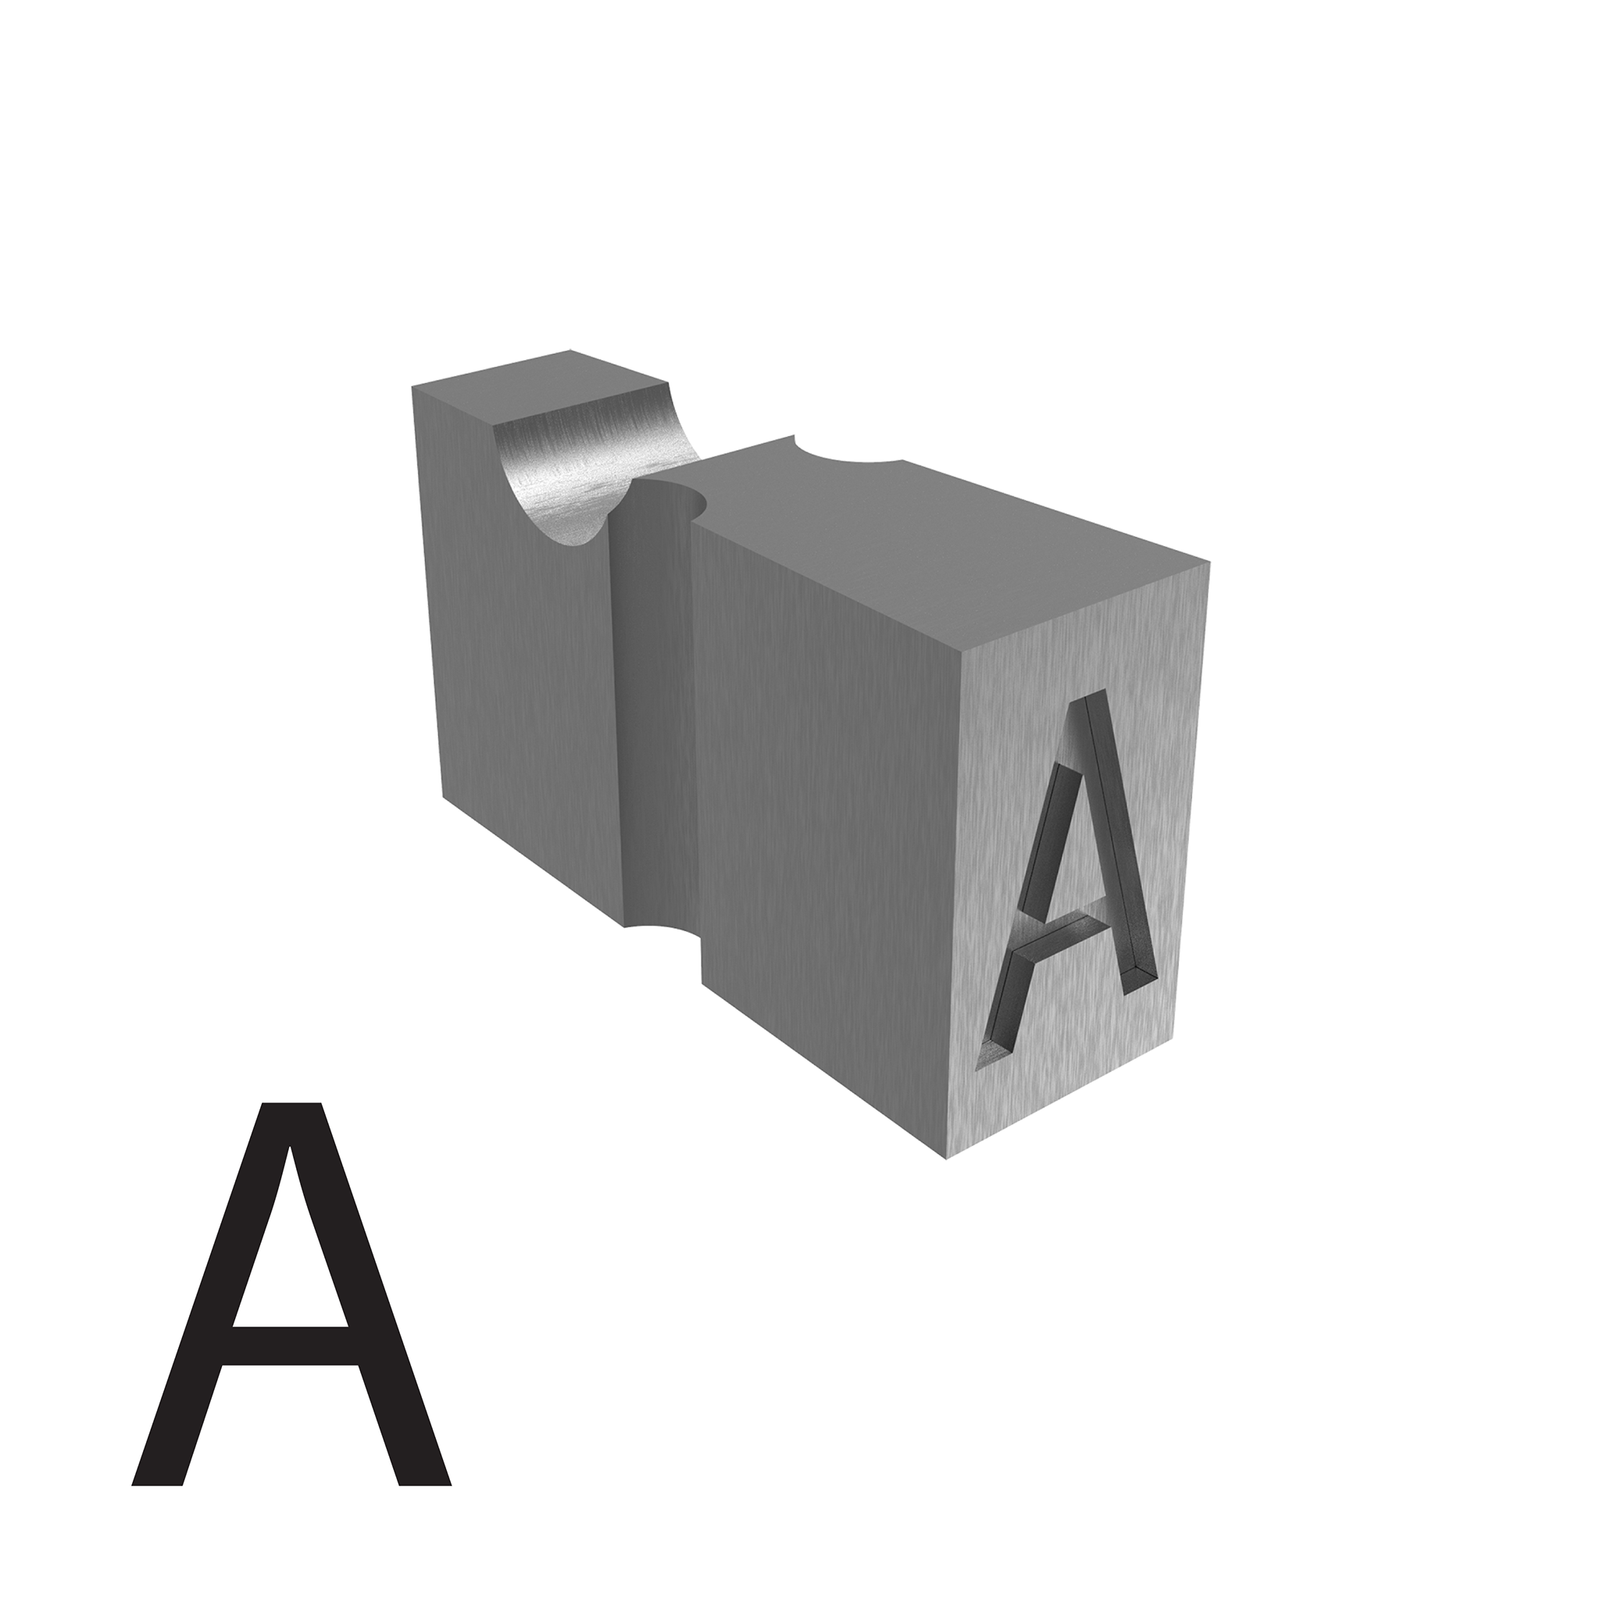  4.9 mm letter A type used for embossed printing 